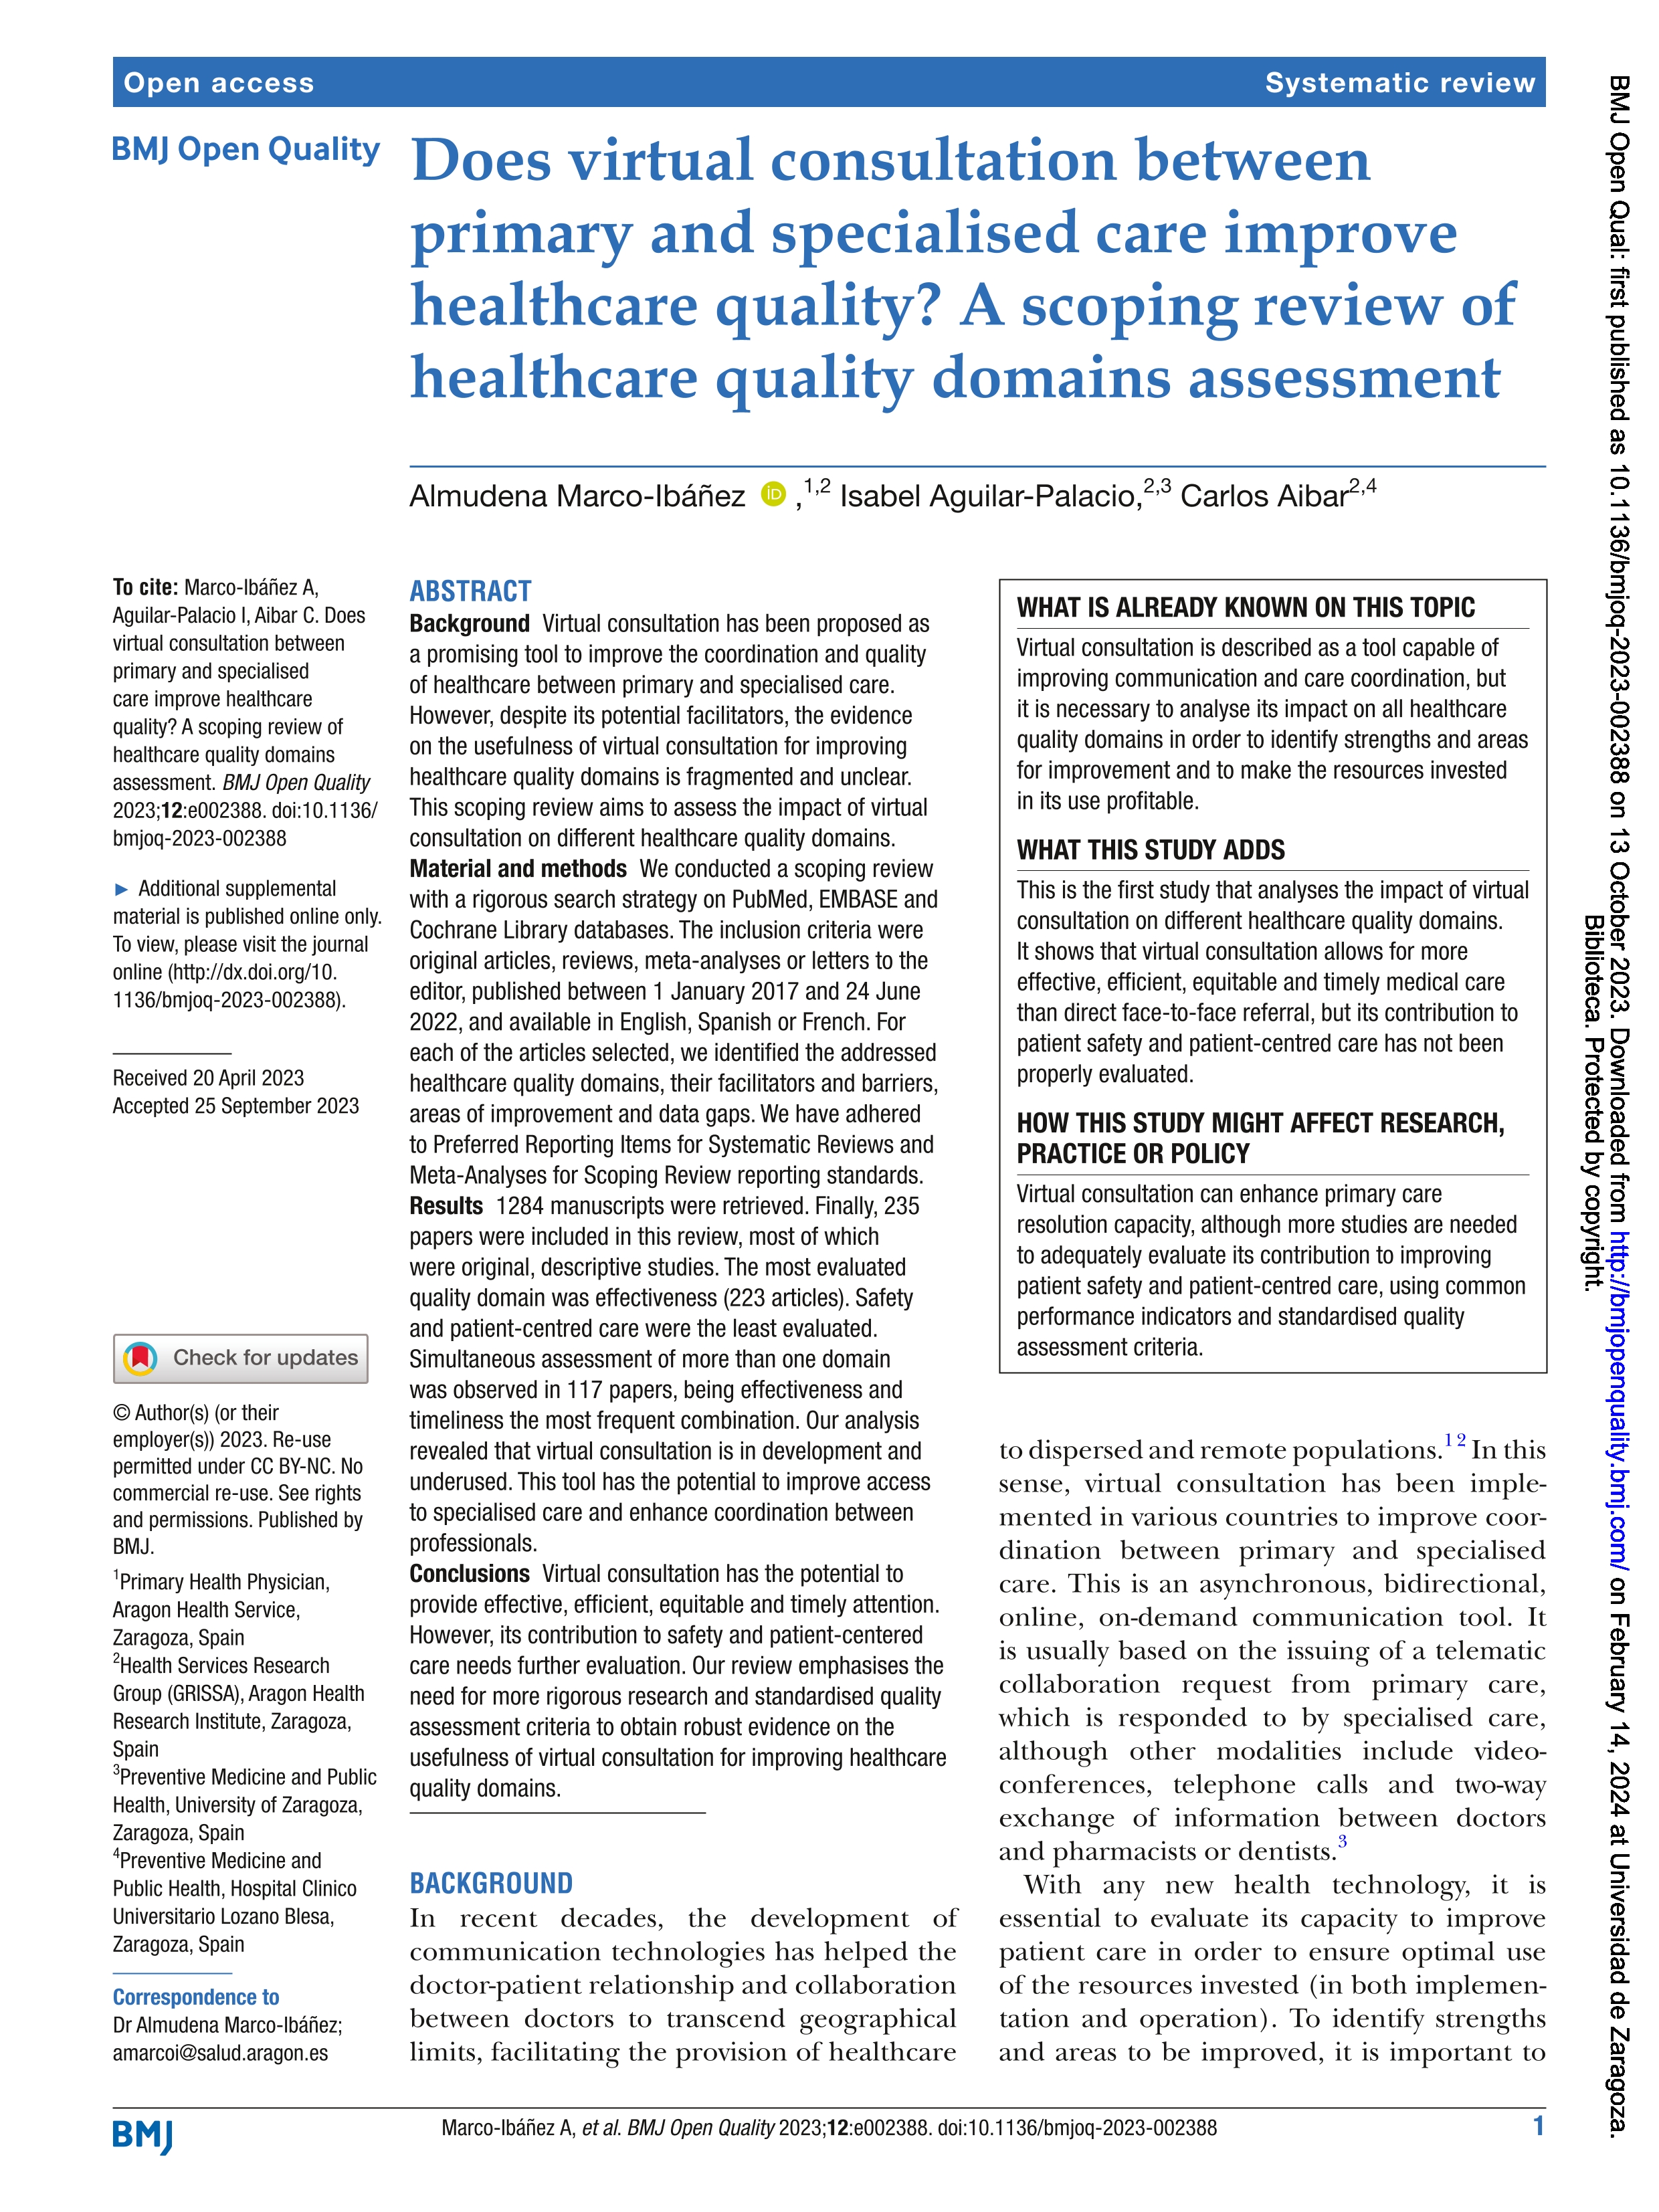 Does virtual consultation between primary and specialised care improve healthcare quality? A scoping review of healthcare quality domains assessment